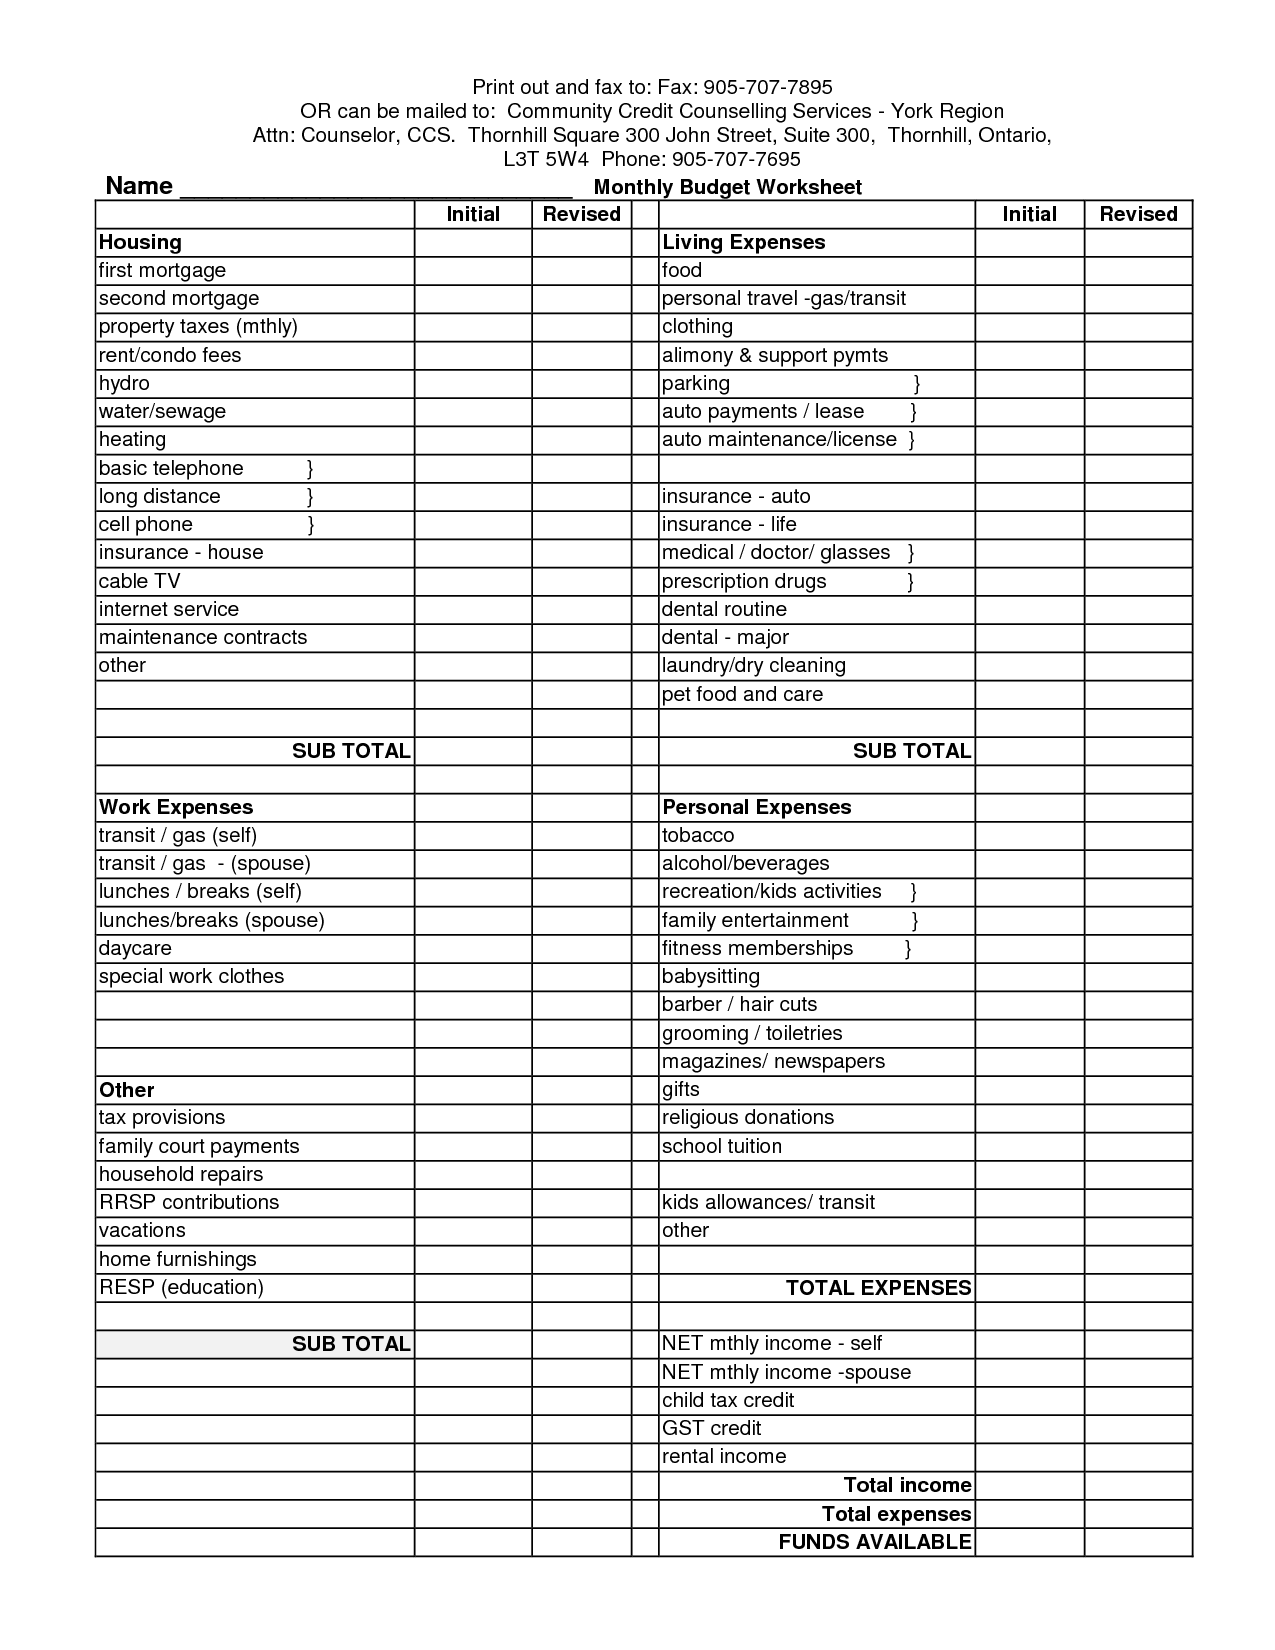 17 Images of Monthly Grocery Budget Worksheet.